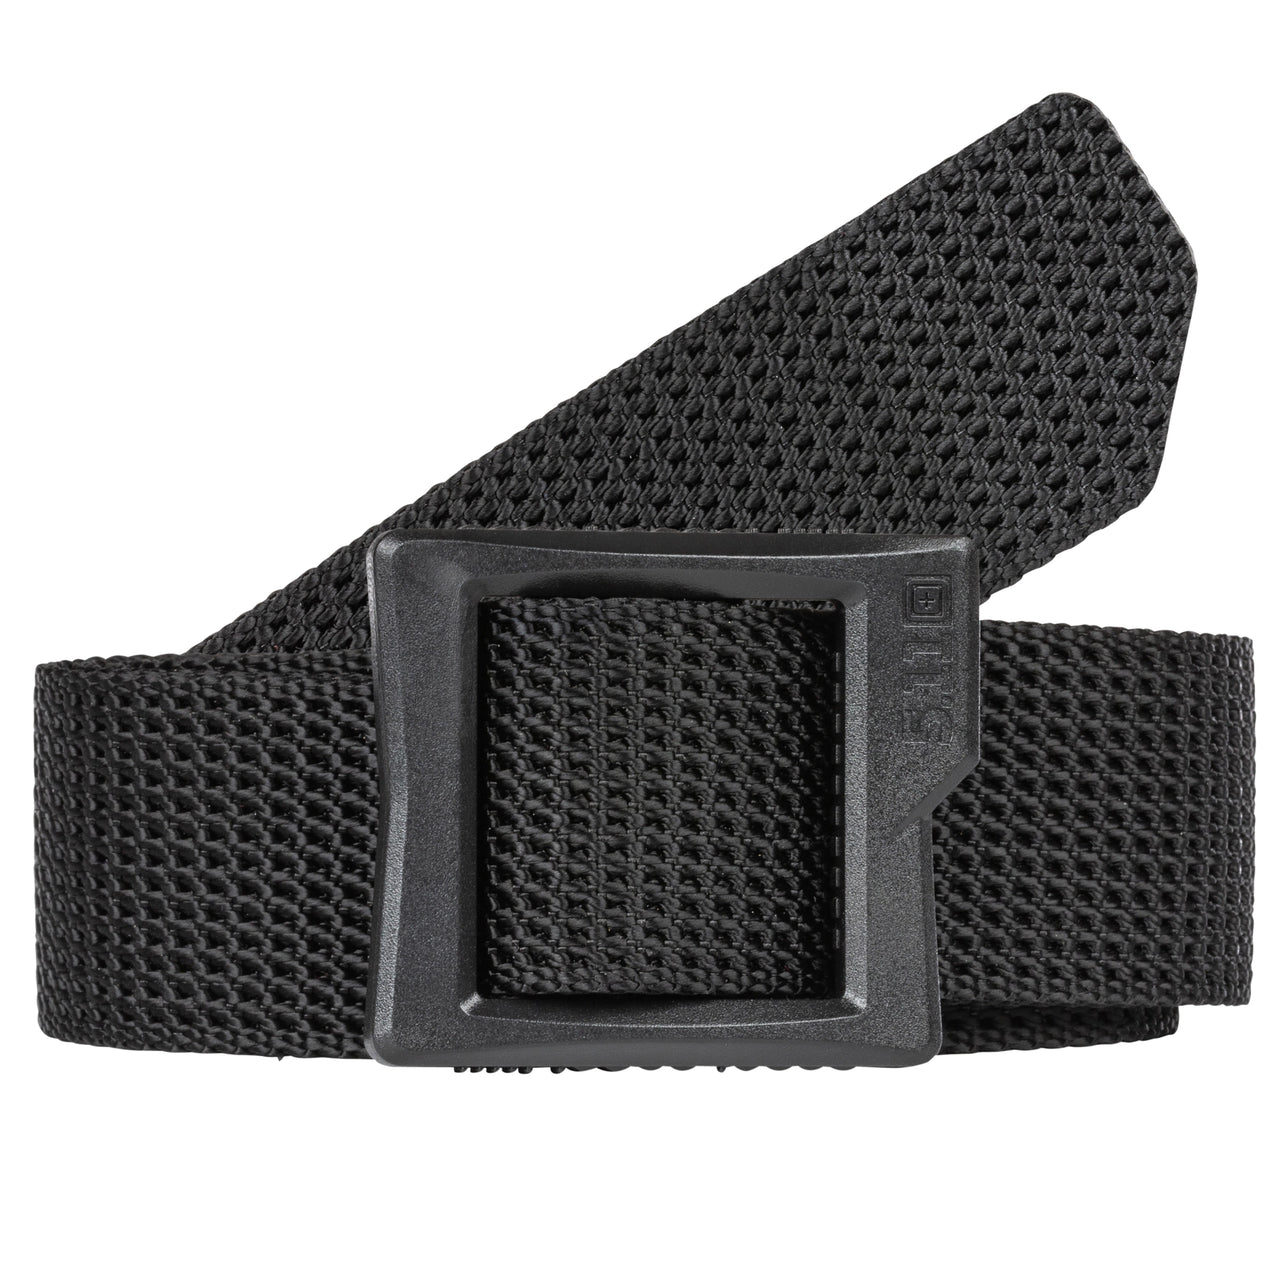 5.11 Tactical 1.5" TDU® Low Pro Belt (56514) | The Fire Center | Fuego Fire Center | Firefighter Gear | The Fire Store | A staple in the 5.11 Tactical line gets some serious updates. The no-sew construction features modular parts for easy replacement. The custom buckle has been upgraded to provide an even more secure fit, yet the lower inset tension bar presents a flatter profile. All of that, and this belt easily converts into a secure tie down or secondary carry strap.